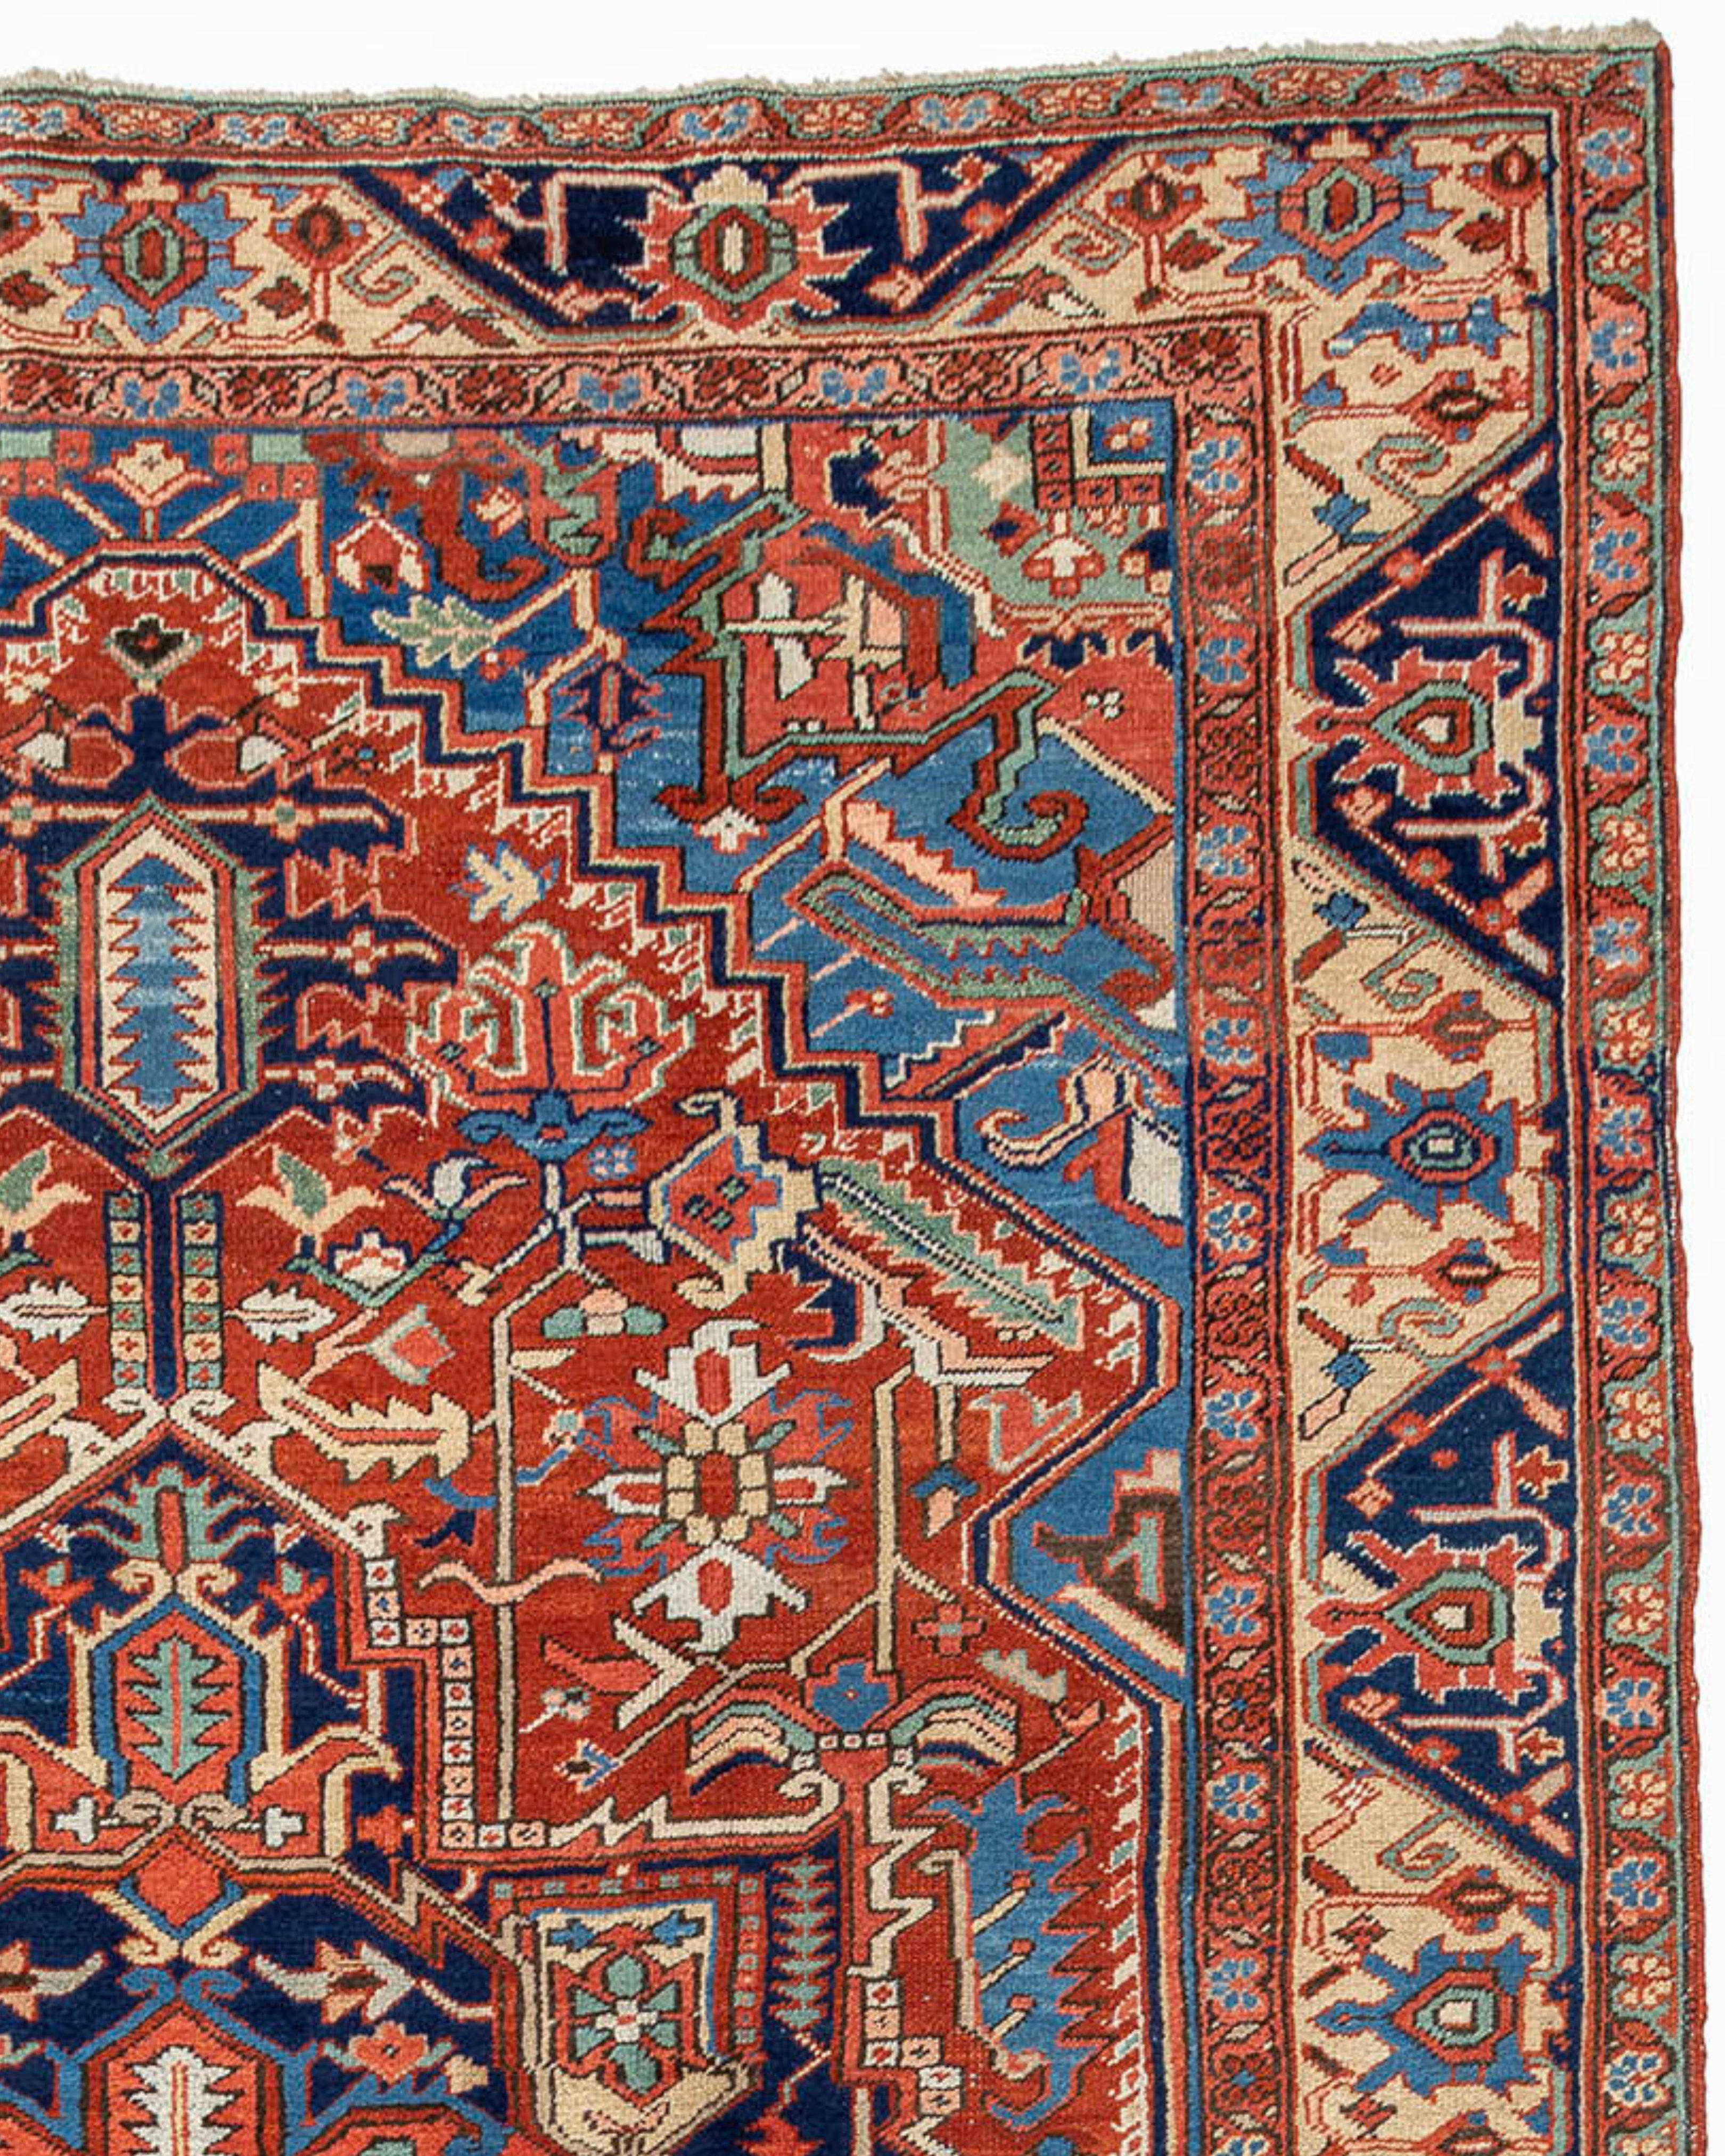 Heriz Rug, Early 20th century

Additional Information:
Dimensions: 7'8